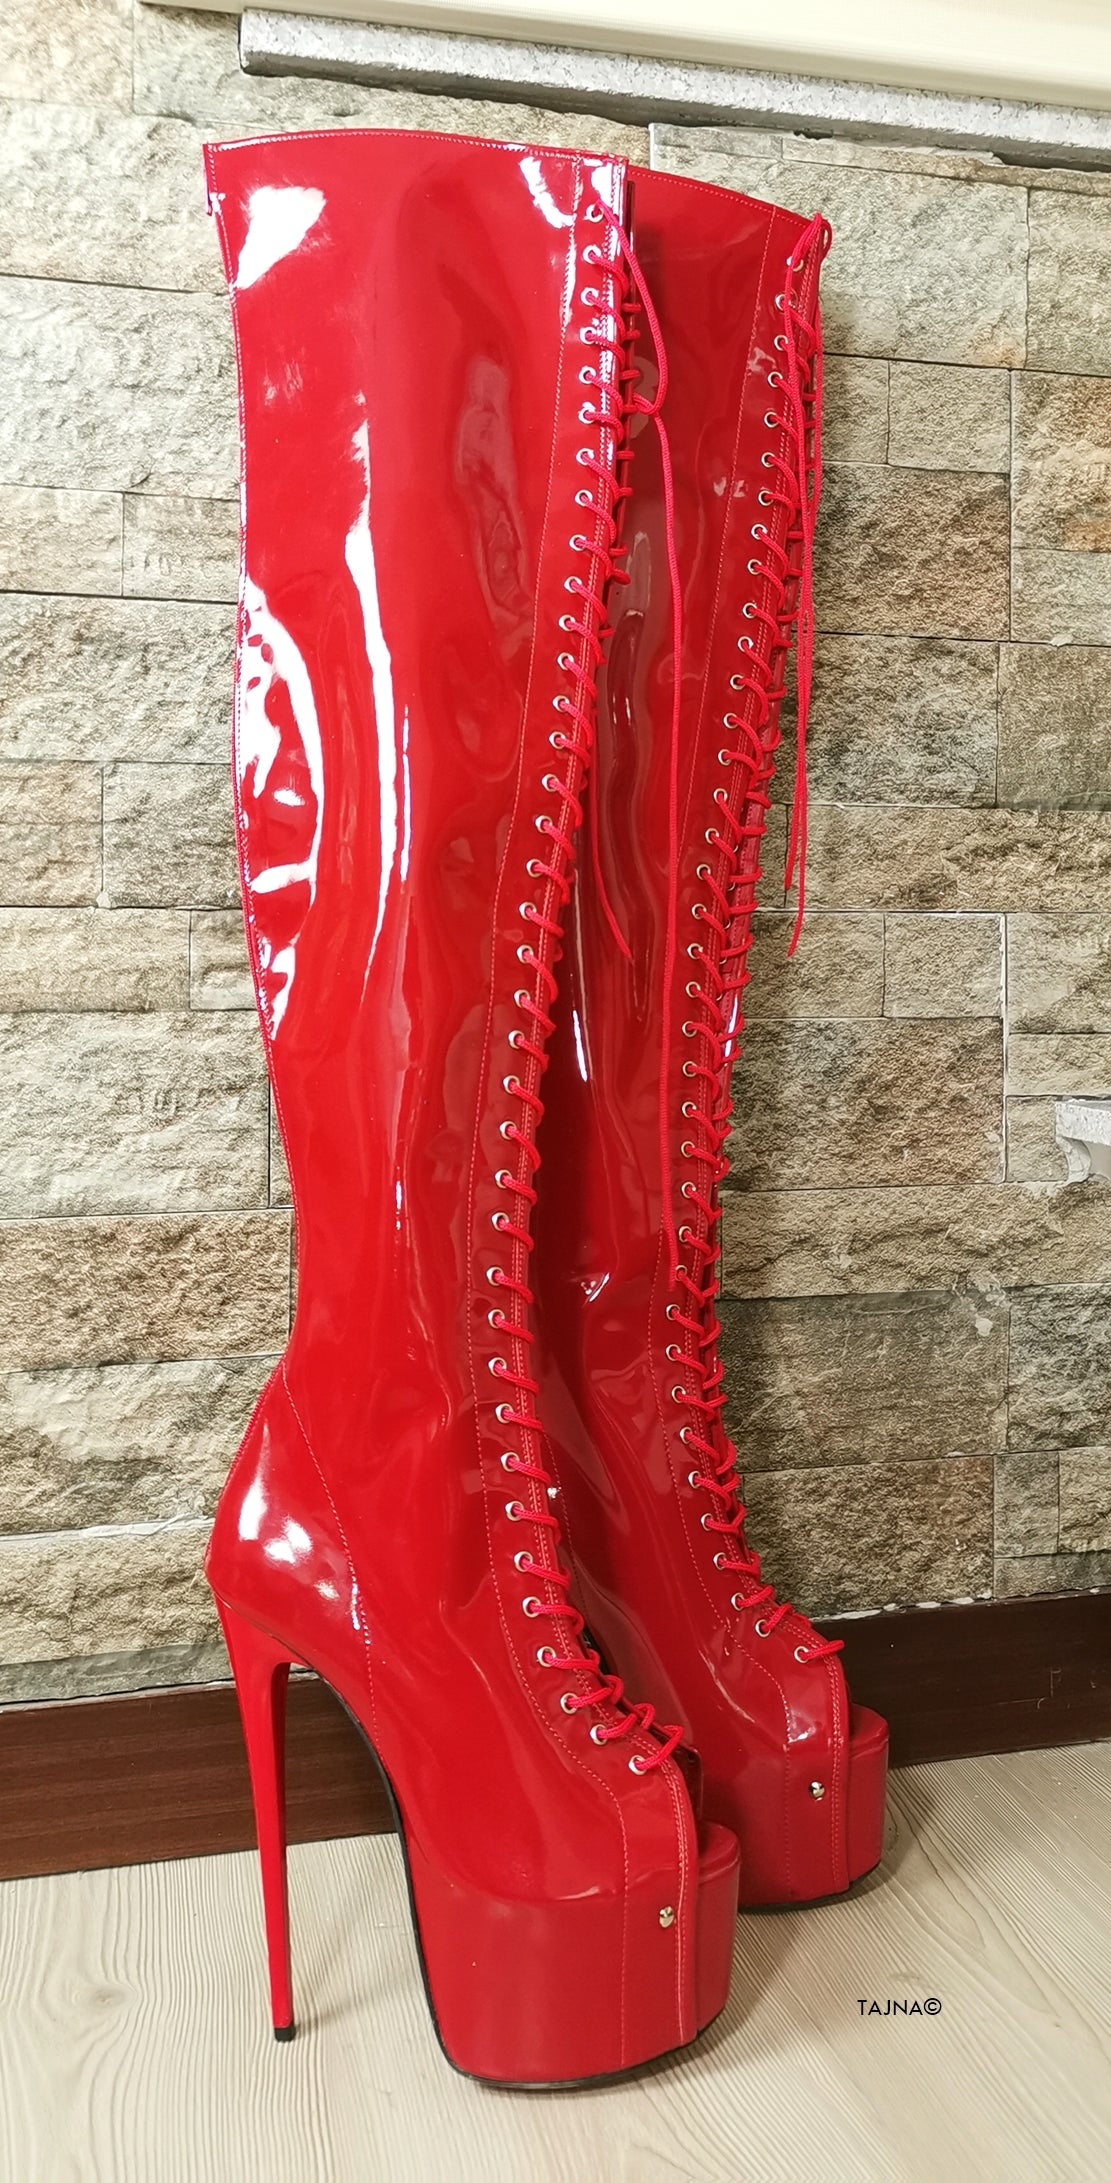 Red Patent Gladiator Lace Up Thigh High Boots - Tajna Club